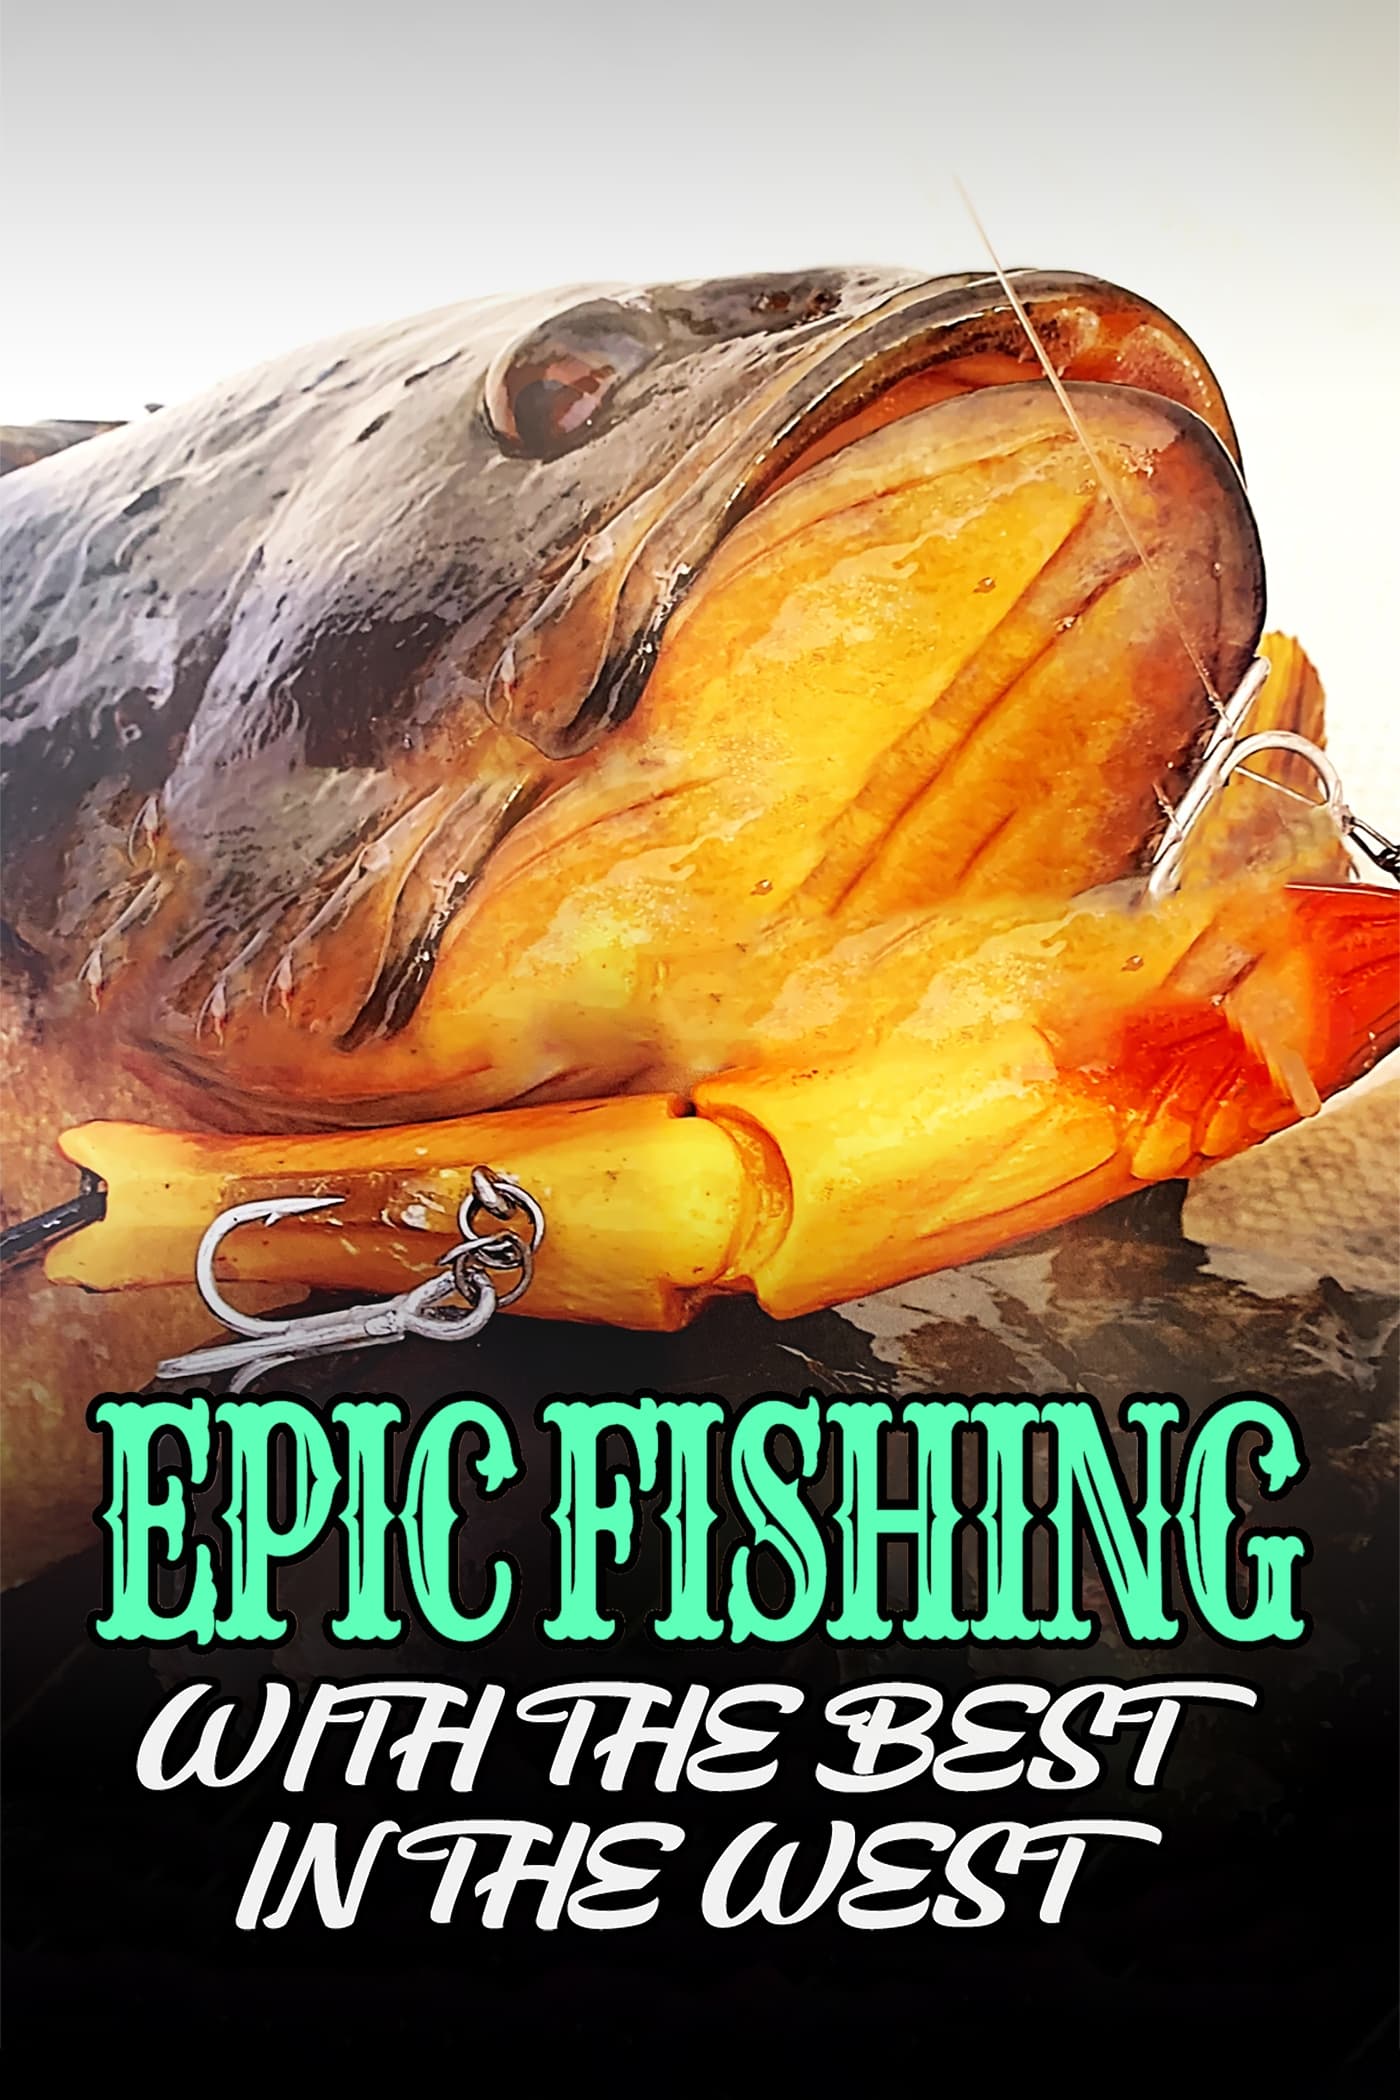 Epic Fishing with the Best in the West